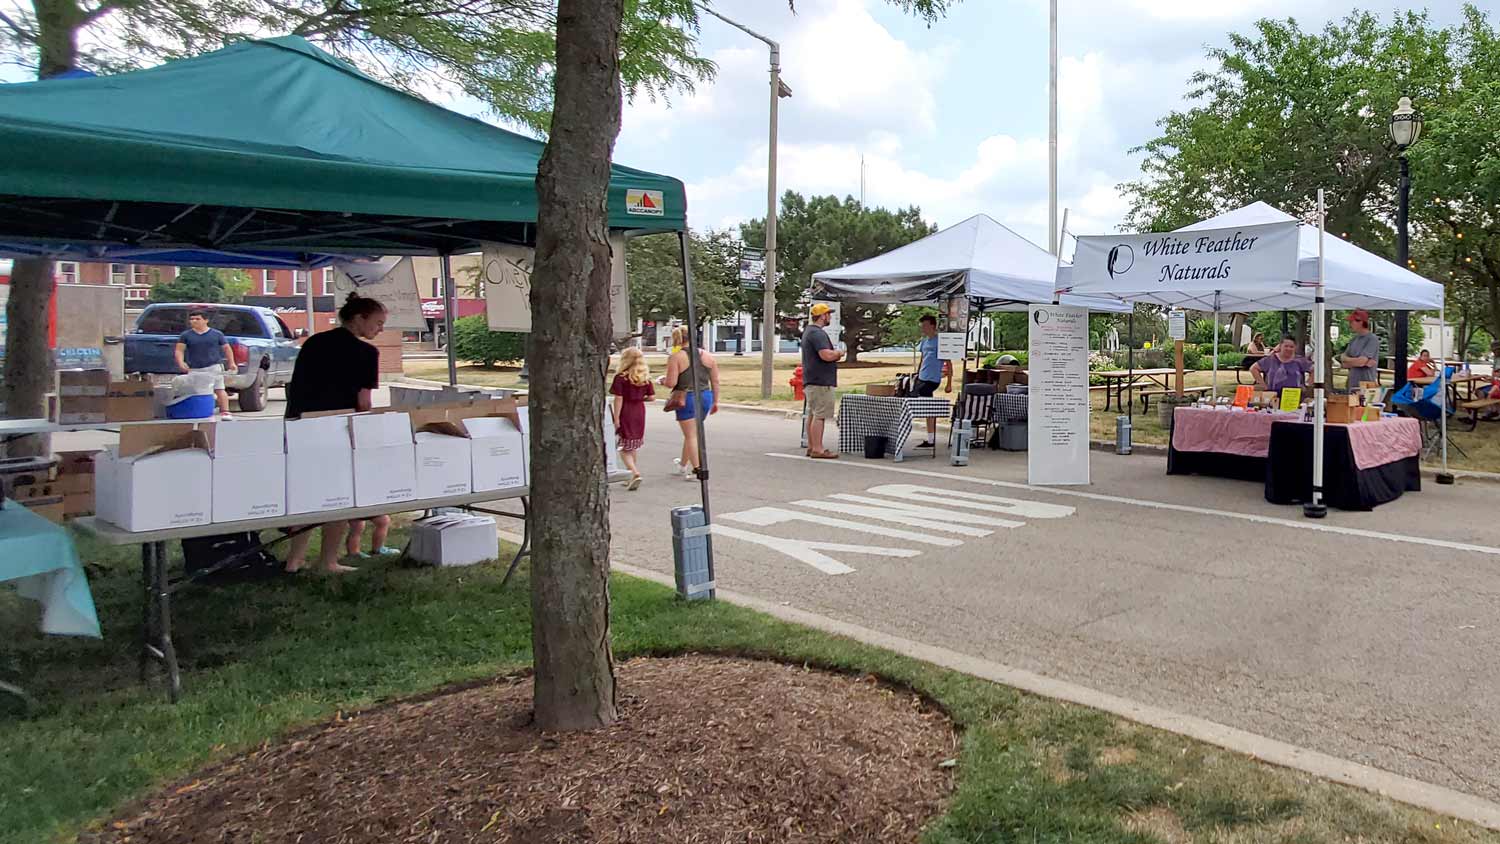 More vendors at the Downtown Crystal Lake Farmers Market.